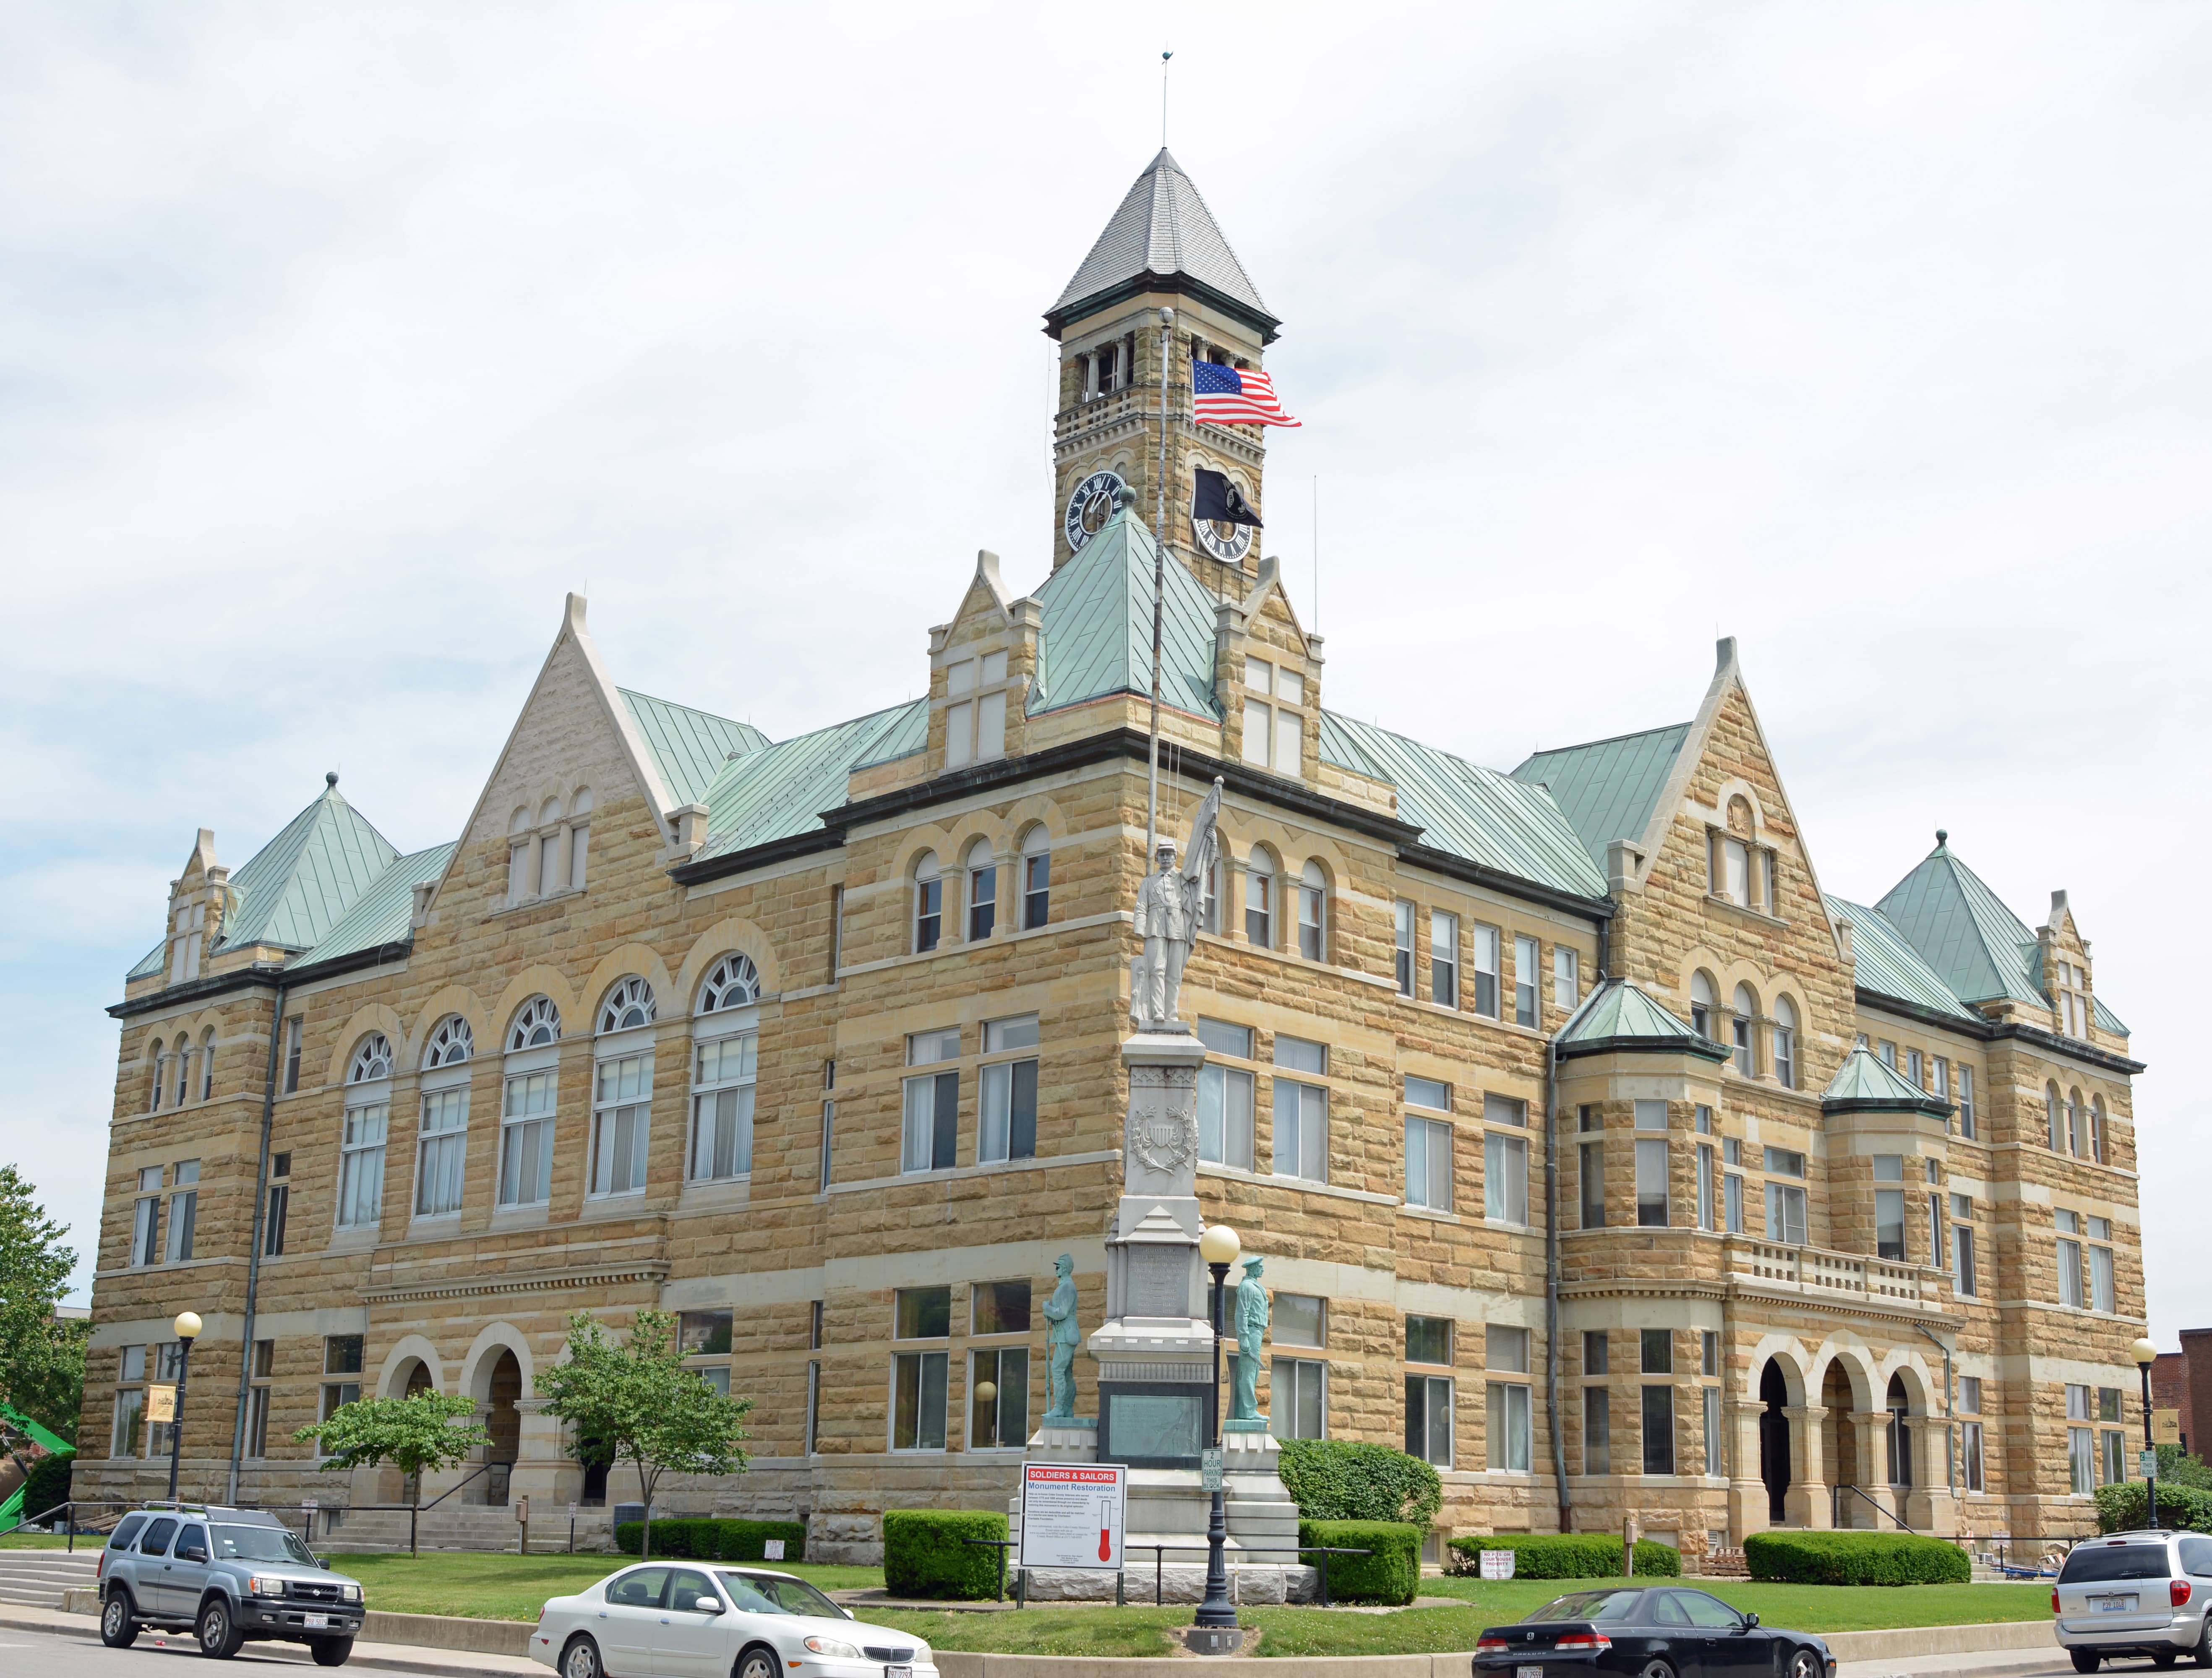 Image of Coles County Supervisor of Assessments Coles County Courthouse